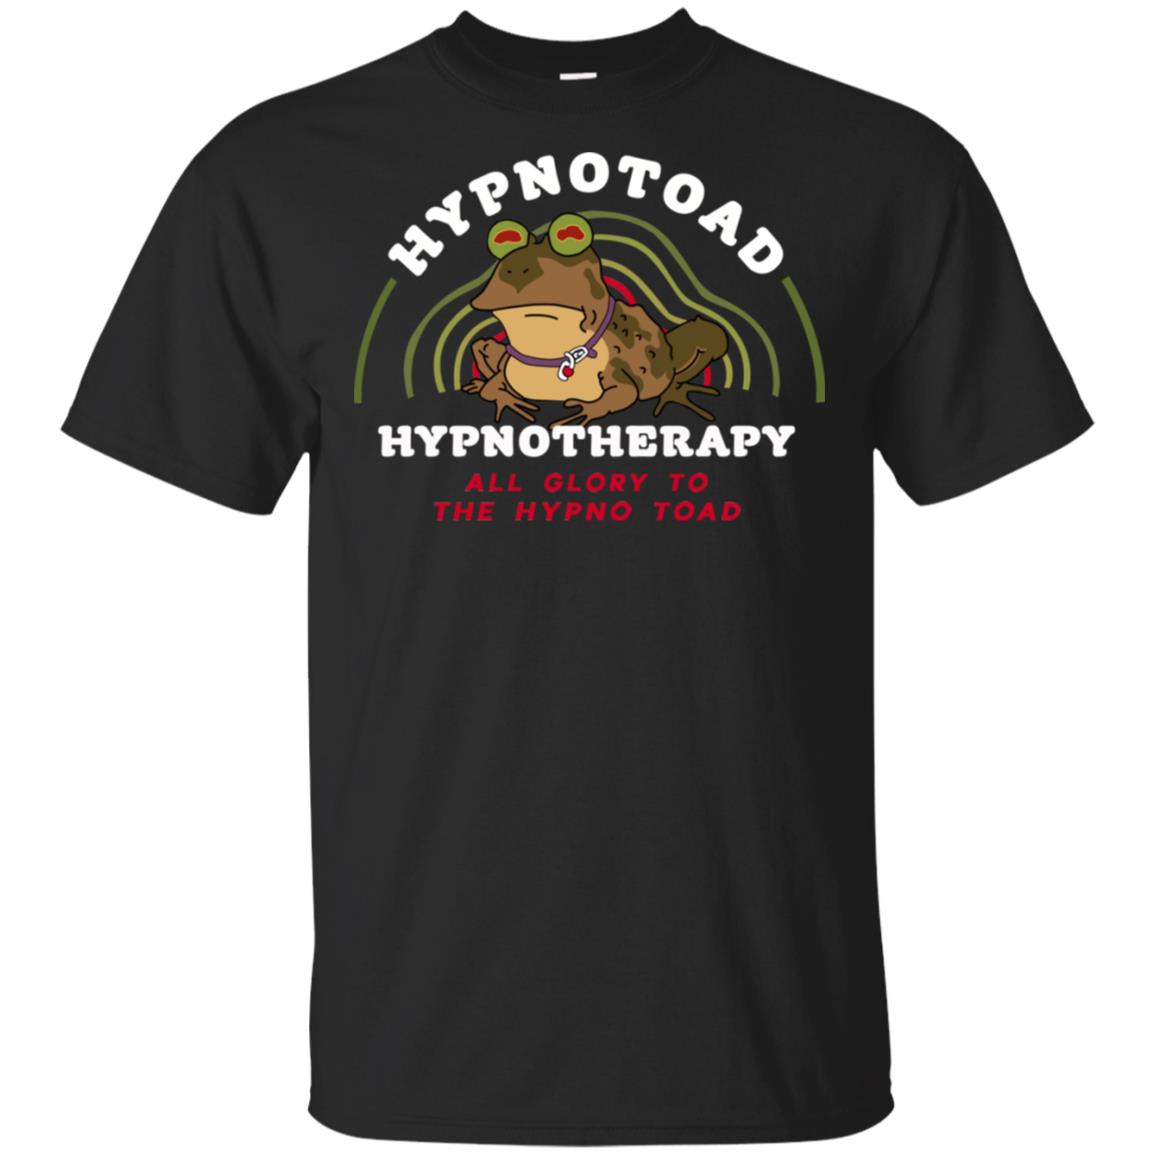 Hypnotoad Hypnotherapy All Glory To The Hypnotoad T Shirts Hoodie